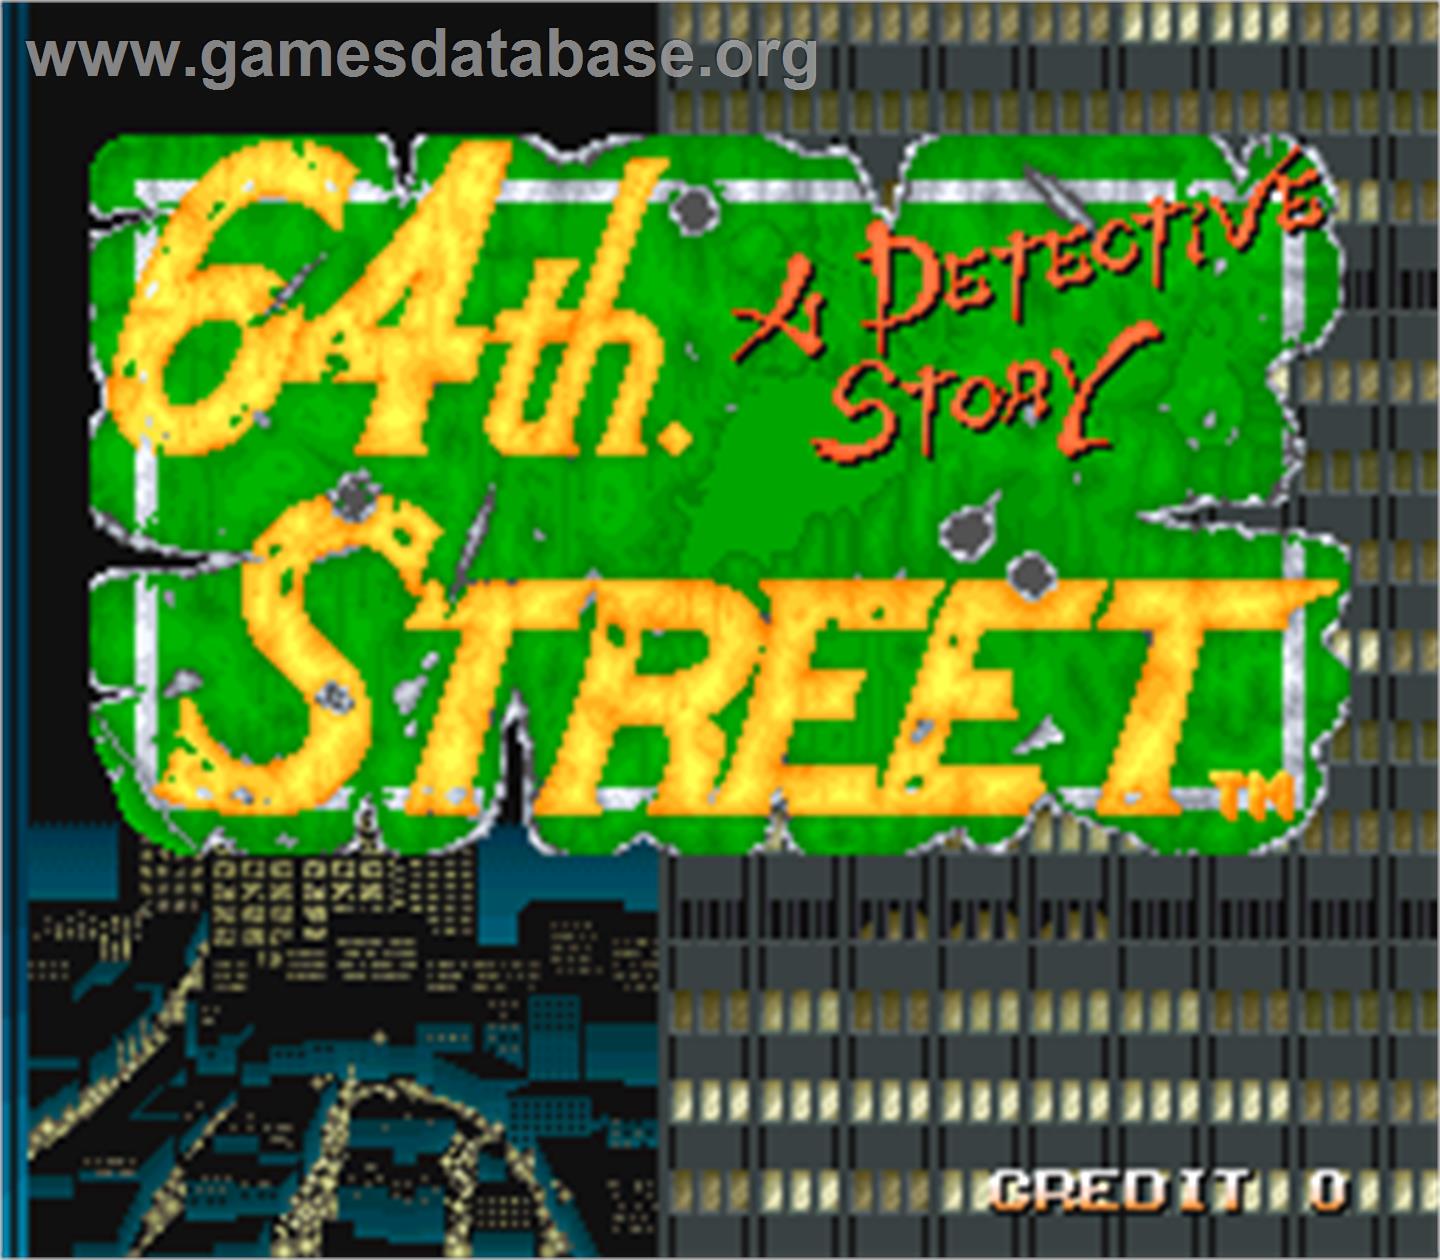 64th. Street - A Detective Story - Arcade - Artwork - Title Screen